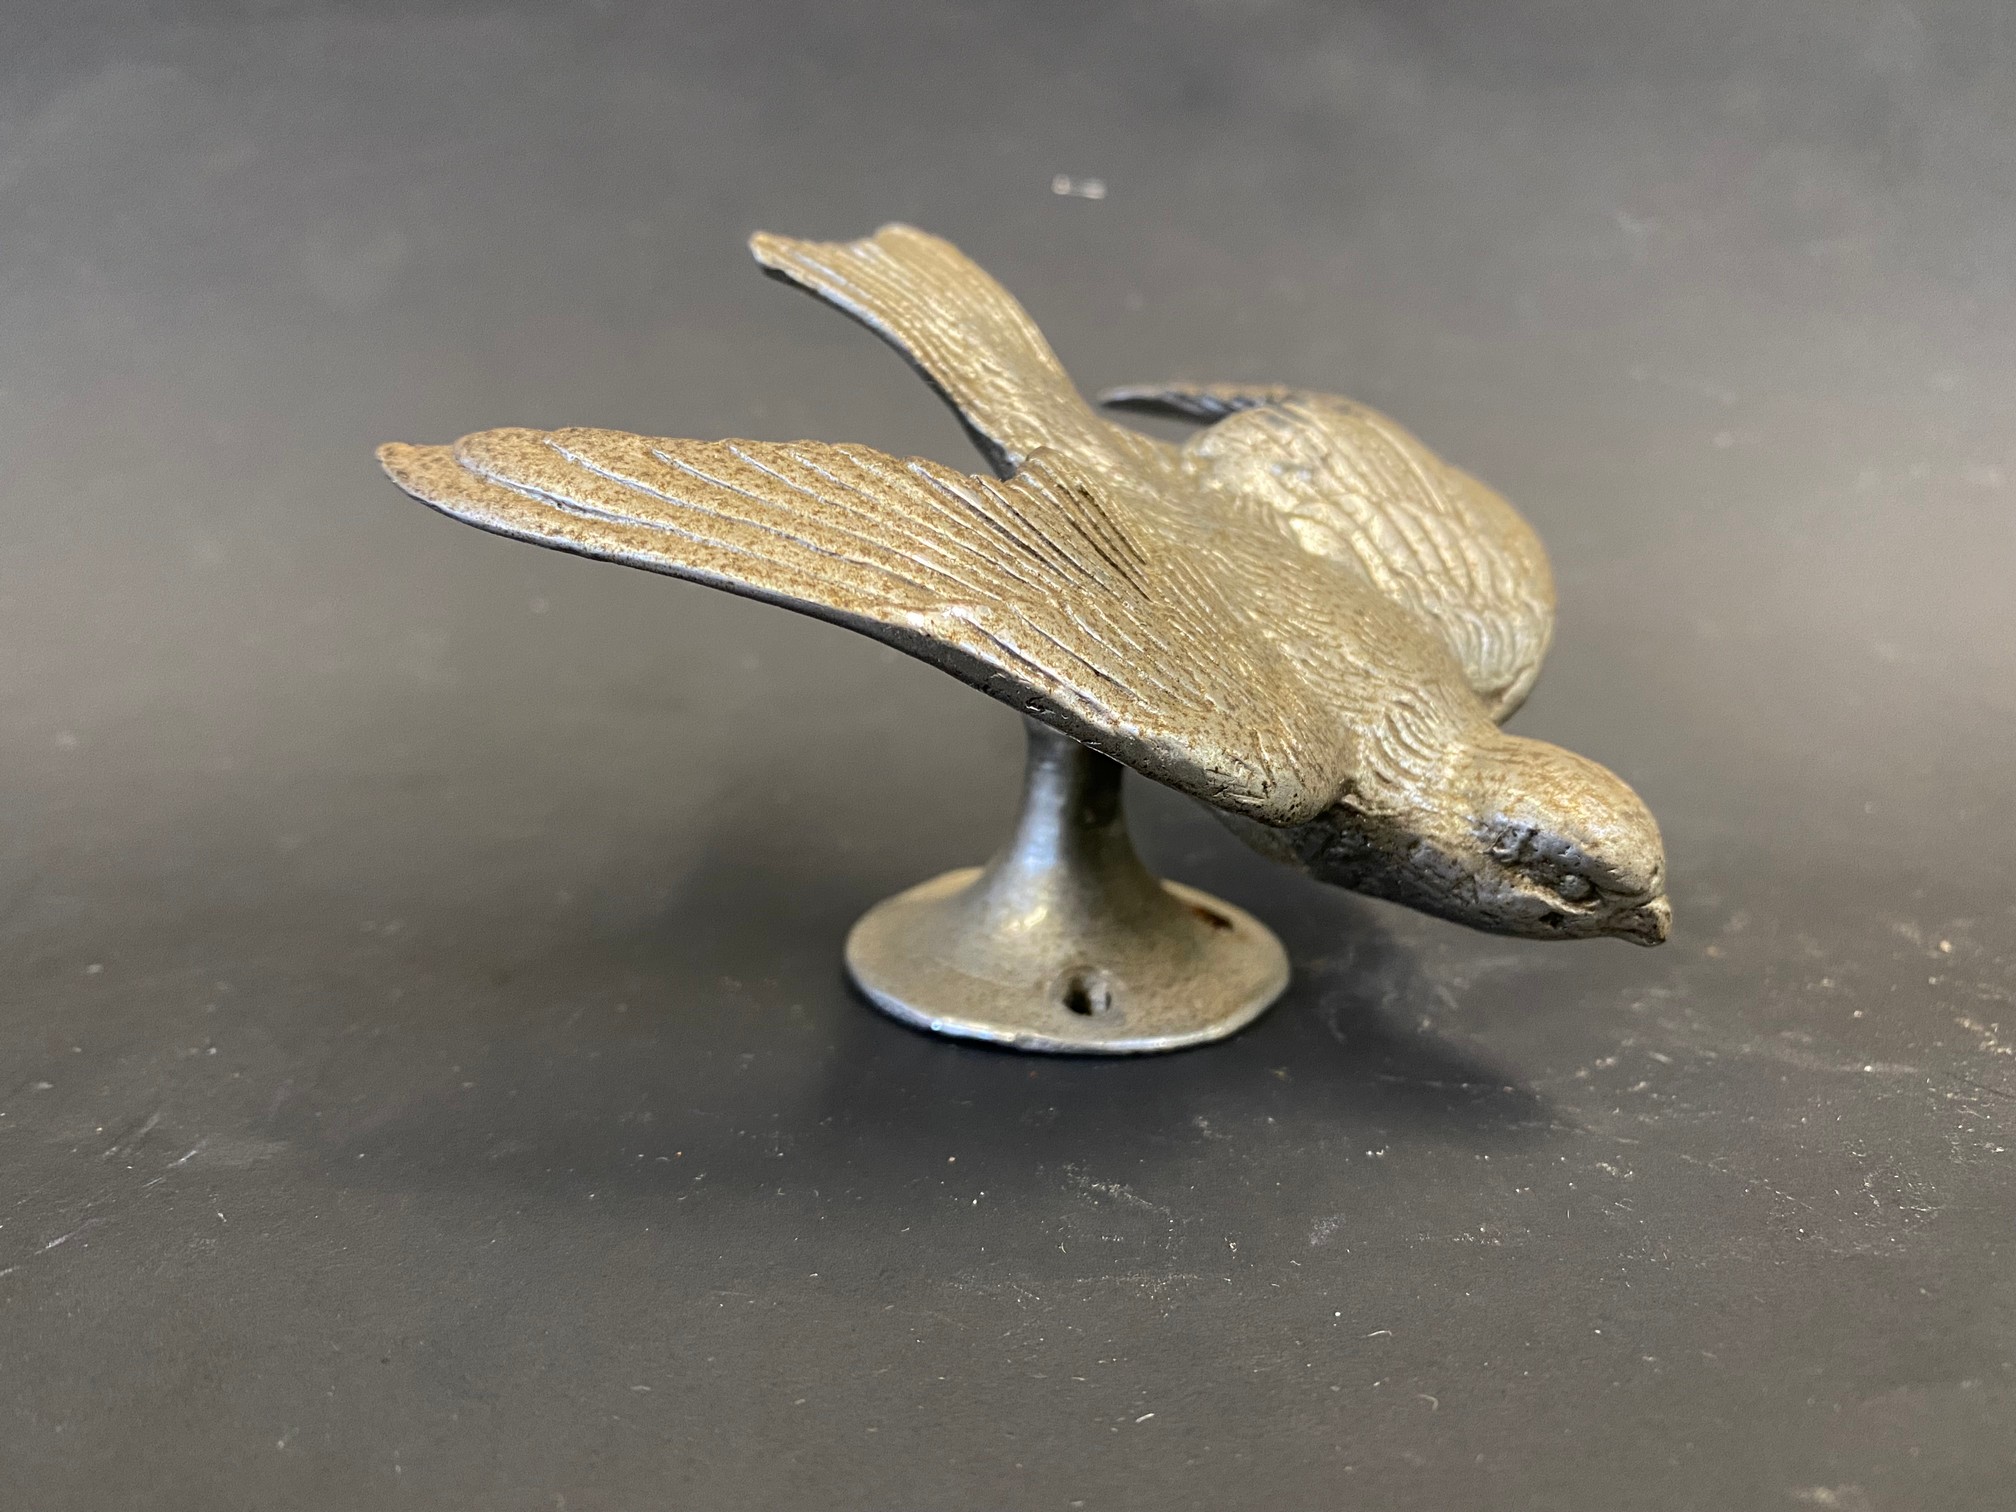 An accessory car mascot in the form of a swallow in flight.